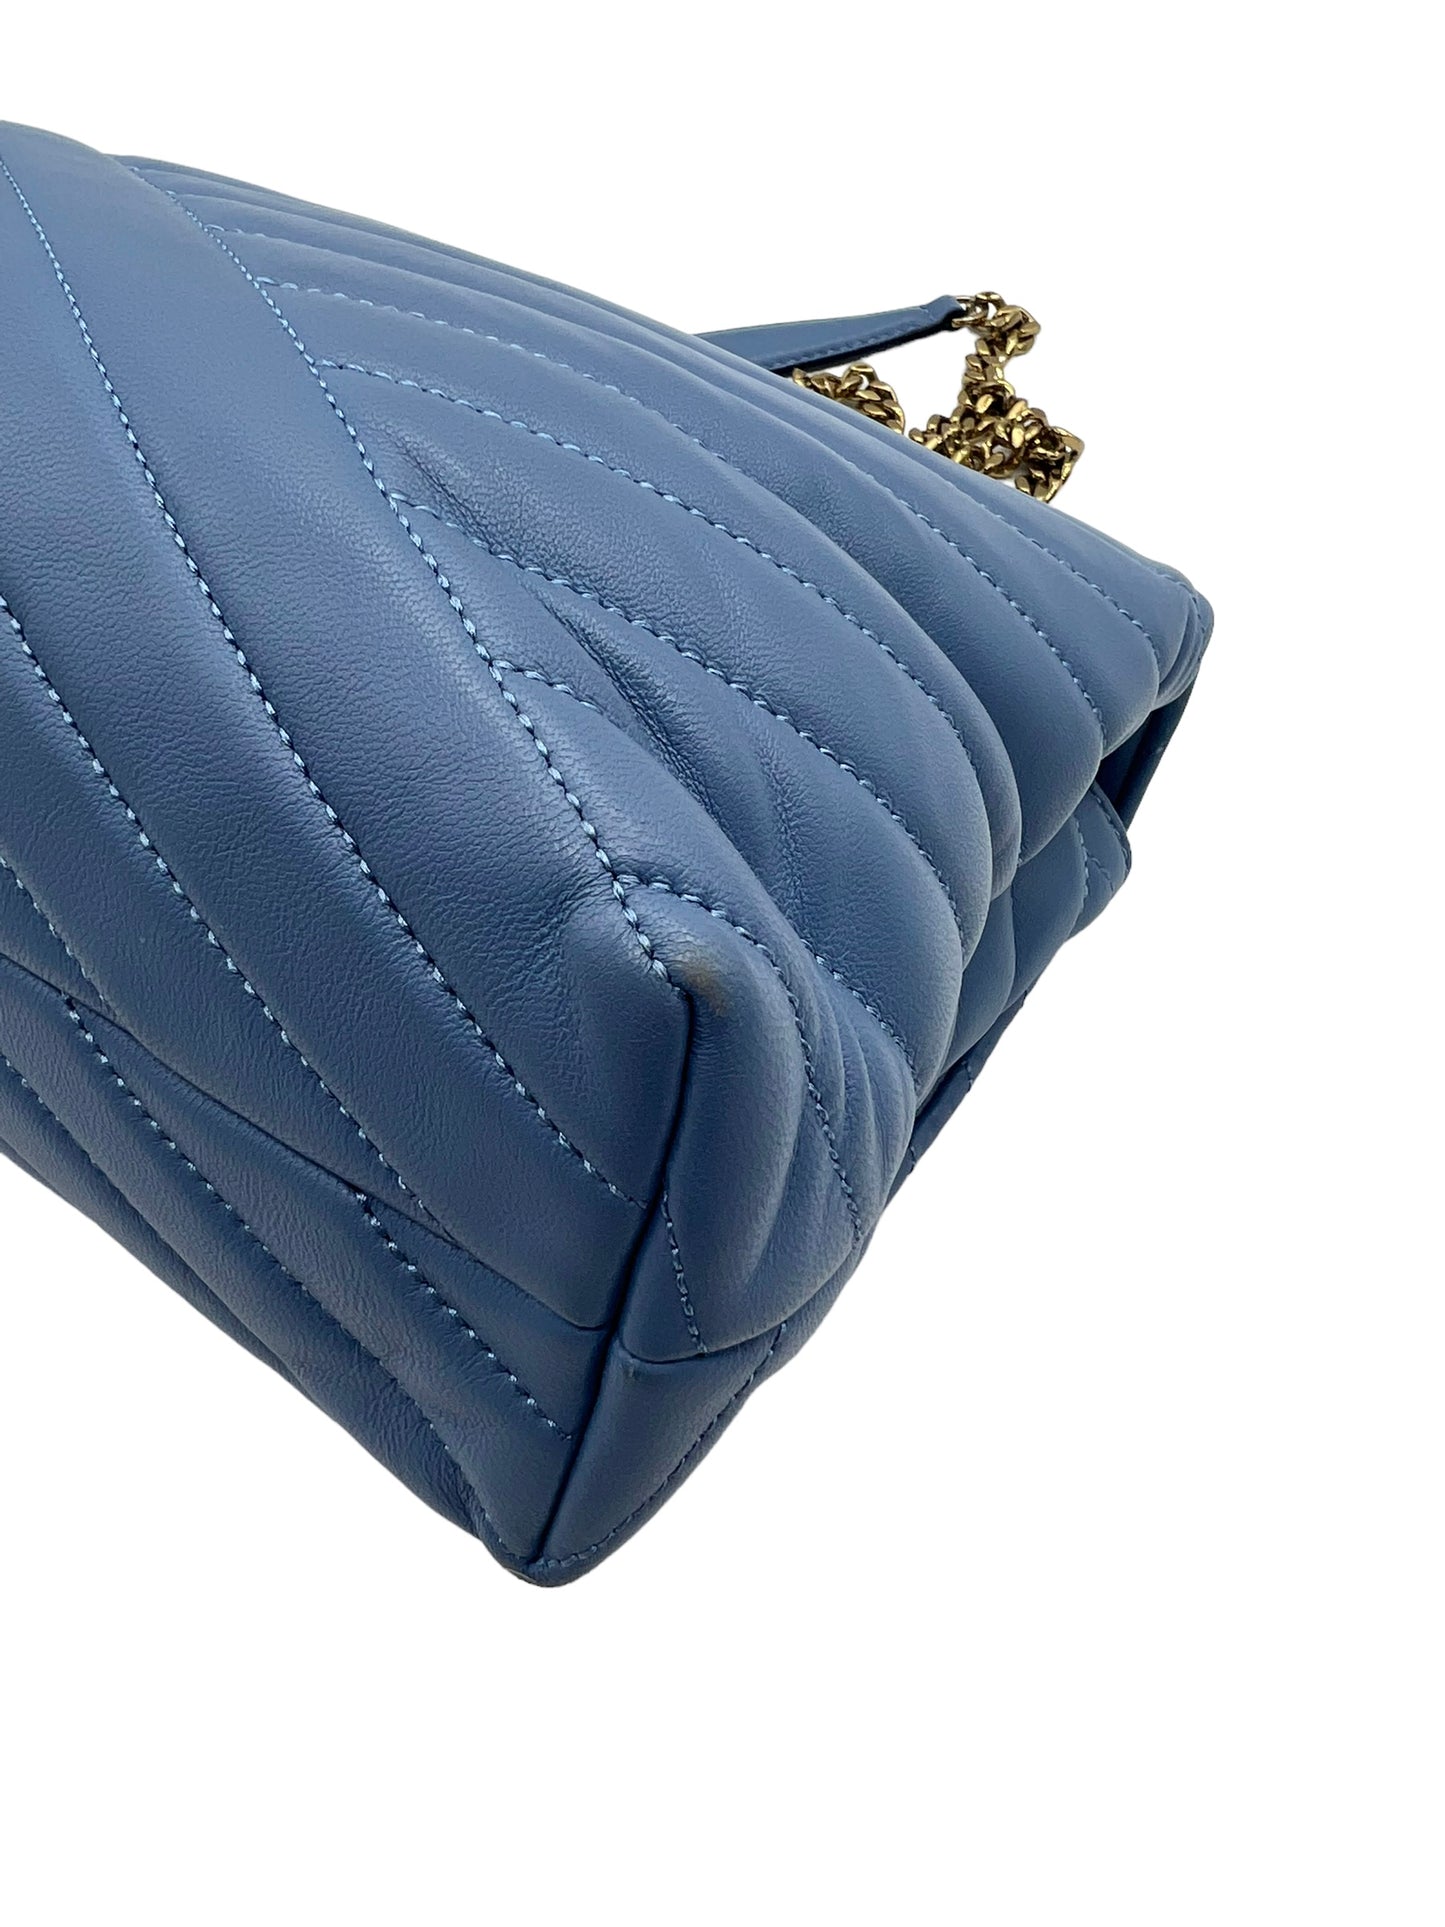 Tory Burch Blue Leather Kira Quilted Chain Shoulder Bag